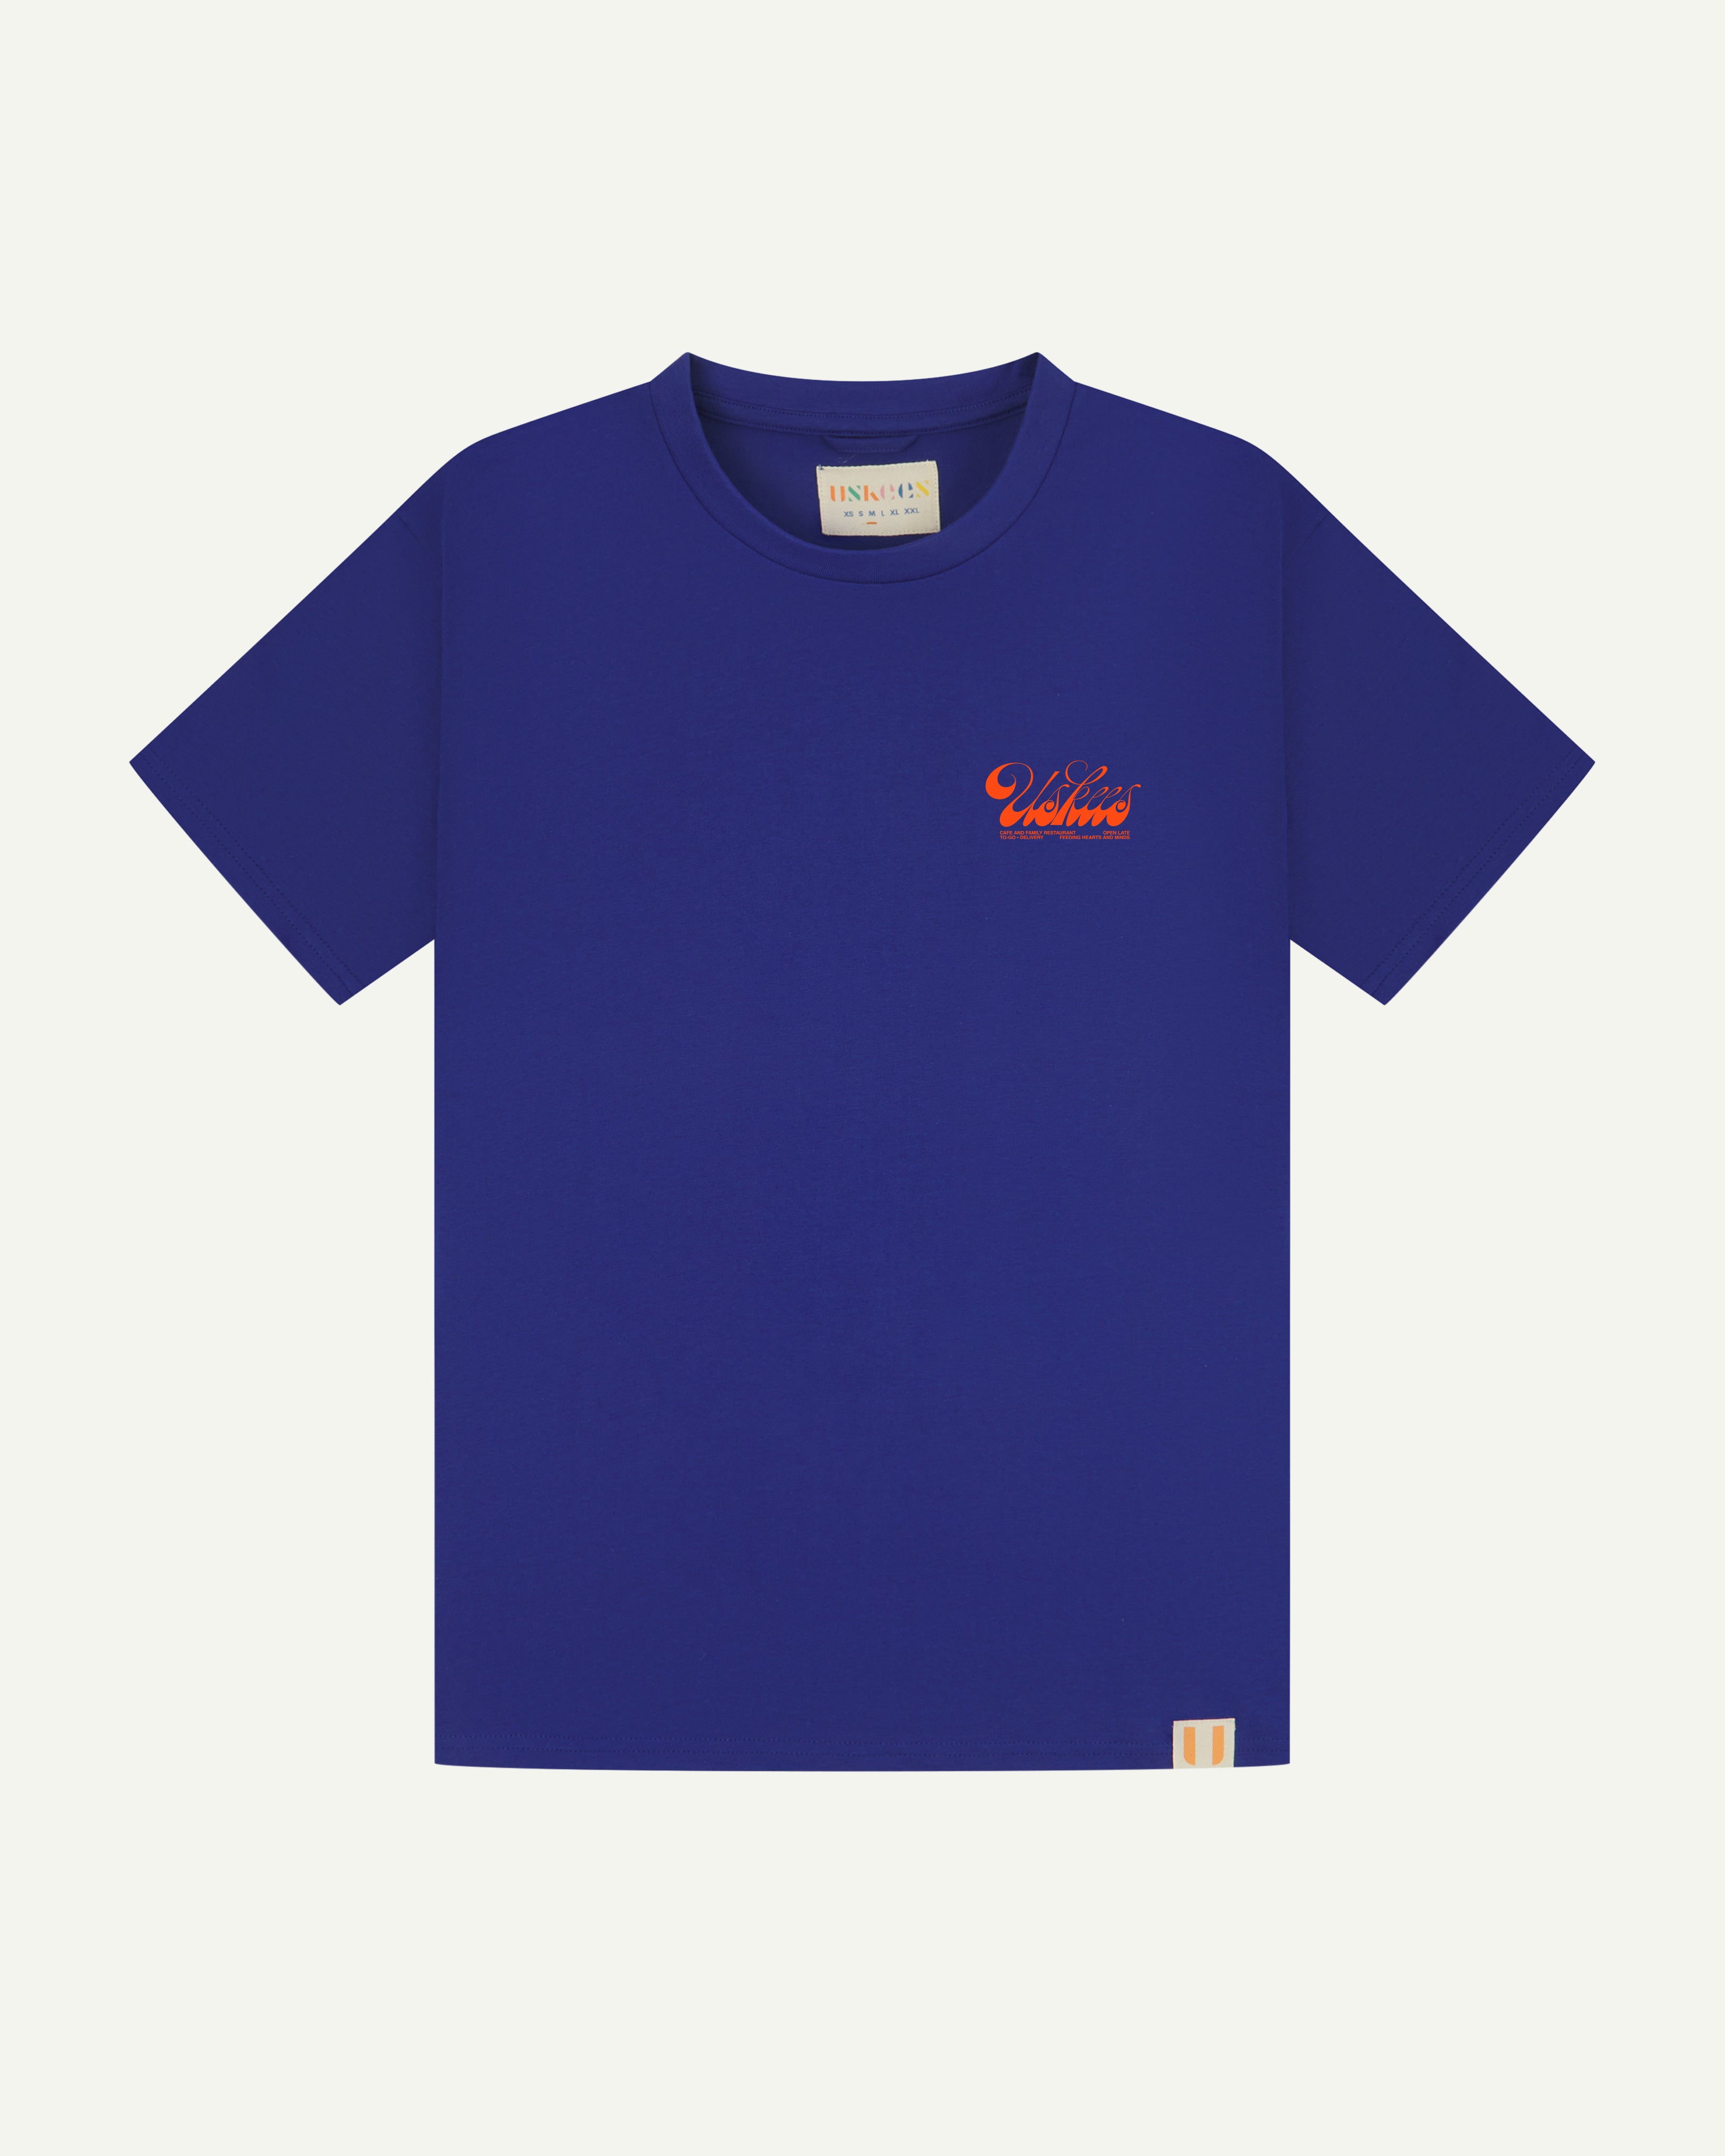 Front flat shot of the uskees men's graphic Tee in ultra blue showing the 'diner' logo in orange